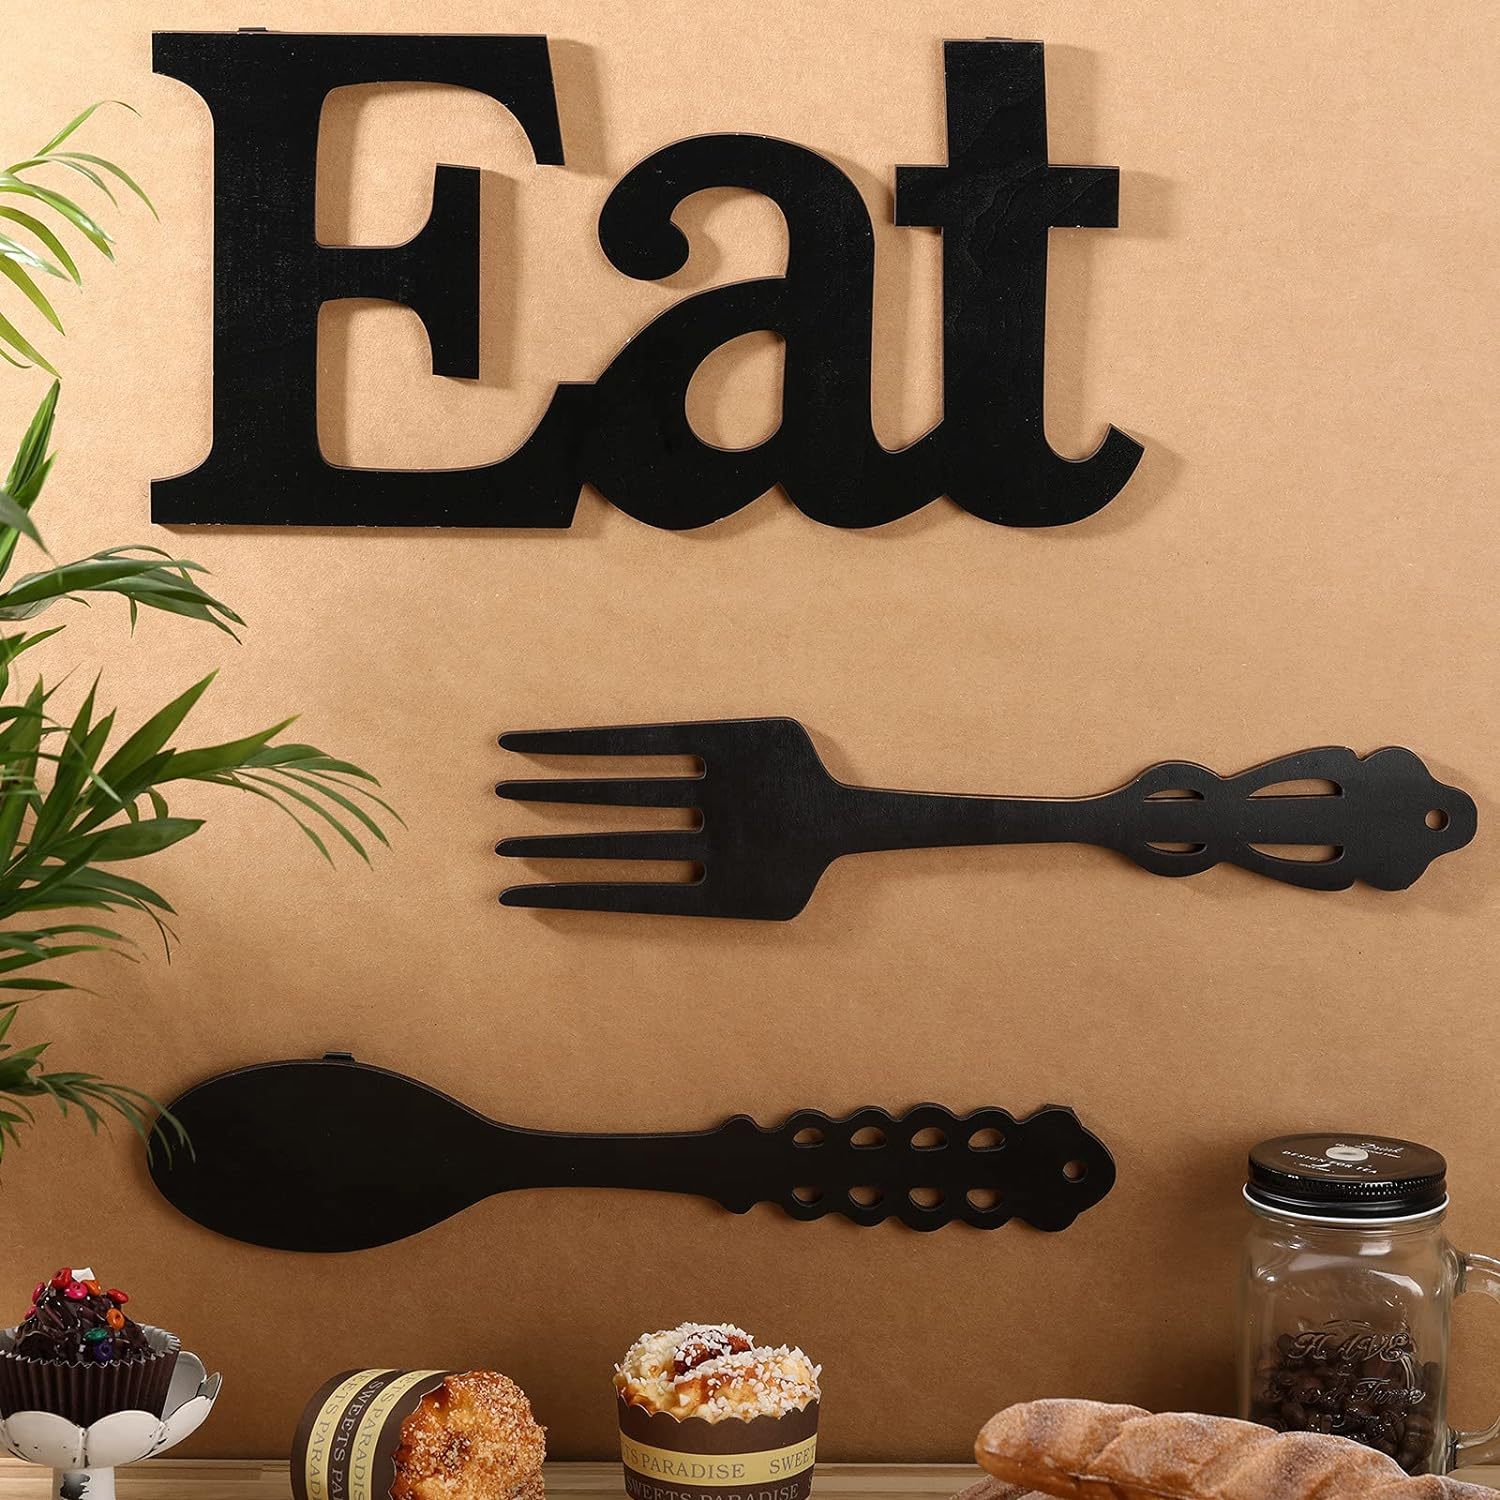 Fork Spoon Knife Wall Hanging Sign Large Wooden Hollow-Out Mural Decal for Kitchen Dining Room & Eatery, Size: Medium